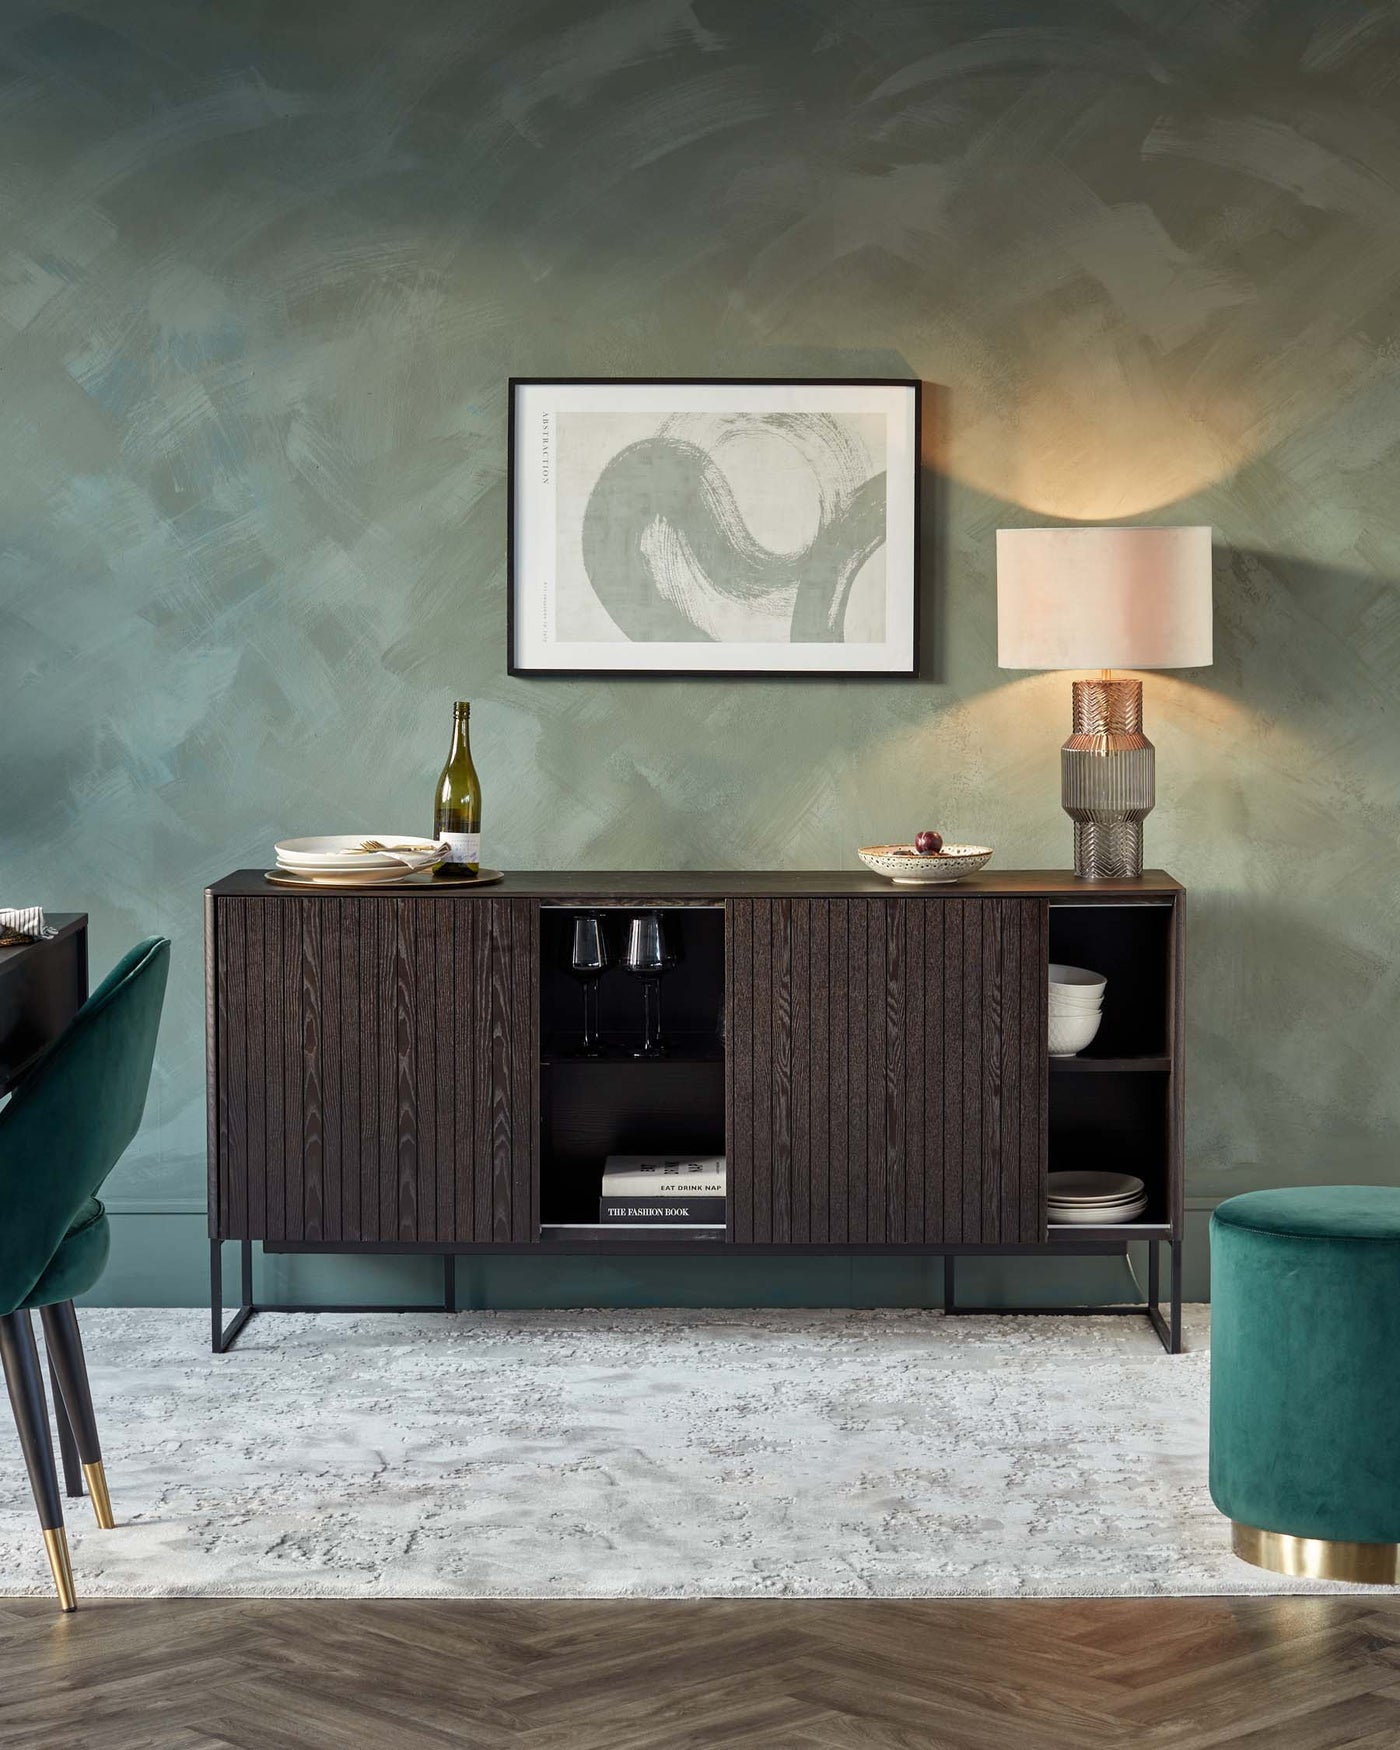 Elegant modern furniture in a stylish interior, featuring a dark wooden sideboard with a textured front, metal legs, and open shelves displaying dishware and books. A velvet green ottoman adds a pop of colour, while a sophisticated table lamp with a cylindrical base and a white shade provides warm lighting. The decor is completed with a framed abstract art piece above the sideboard, creating a cohesive and refined aesthetic.